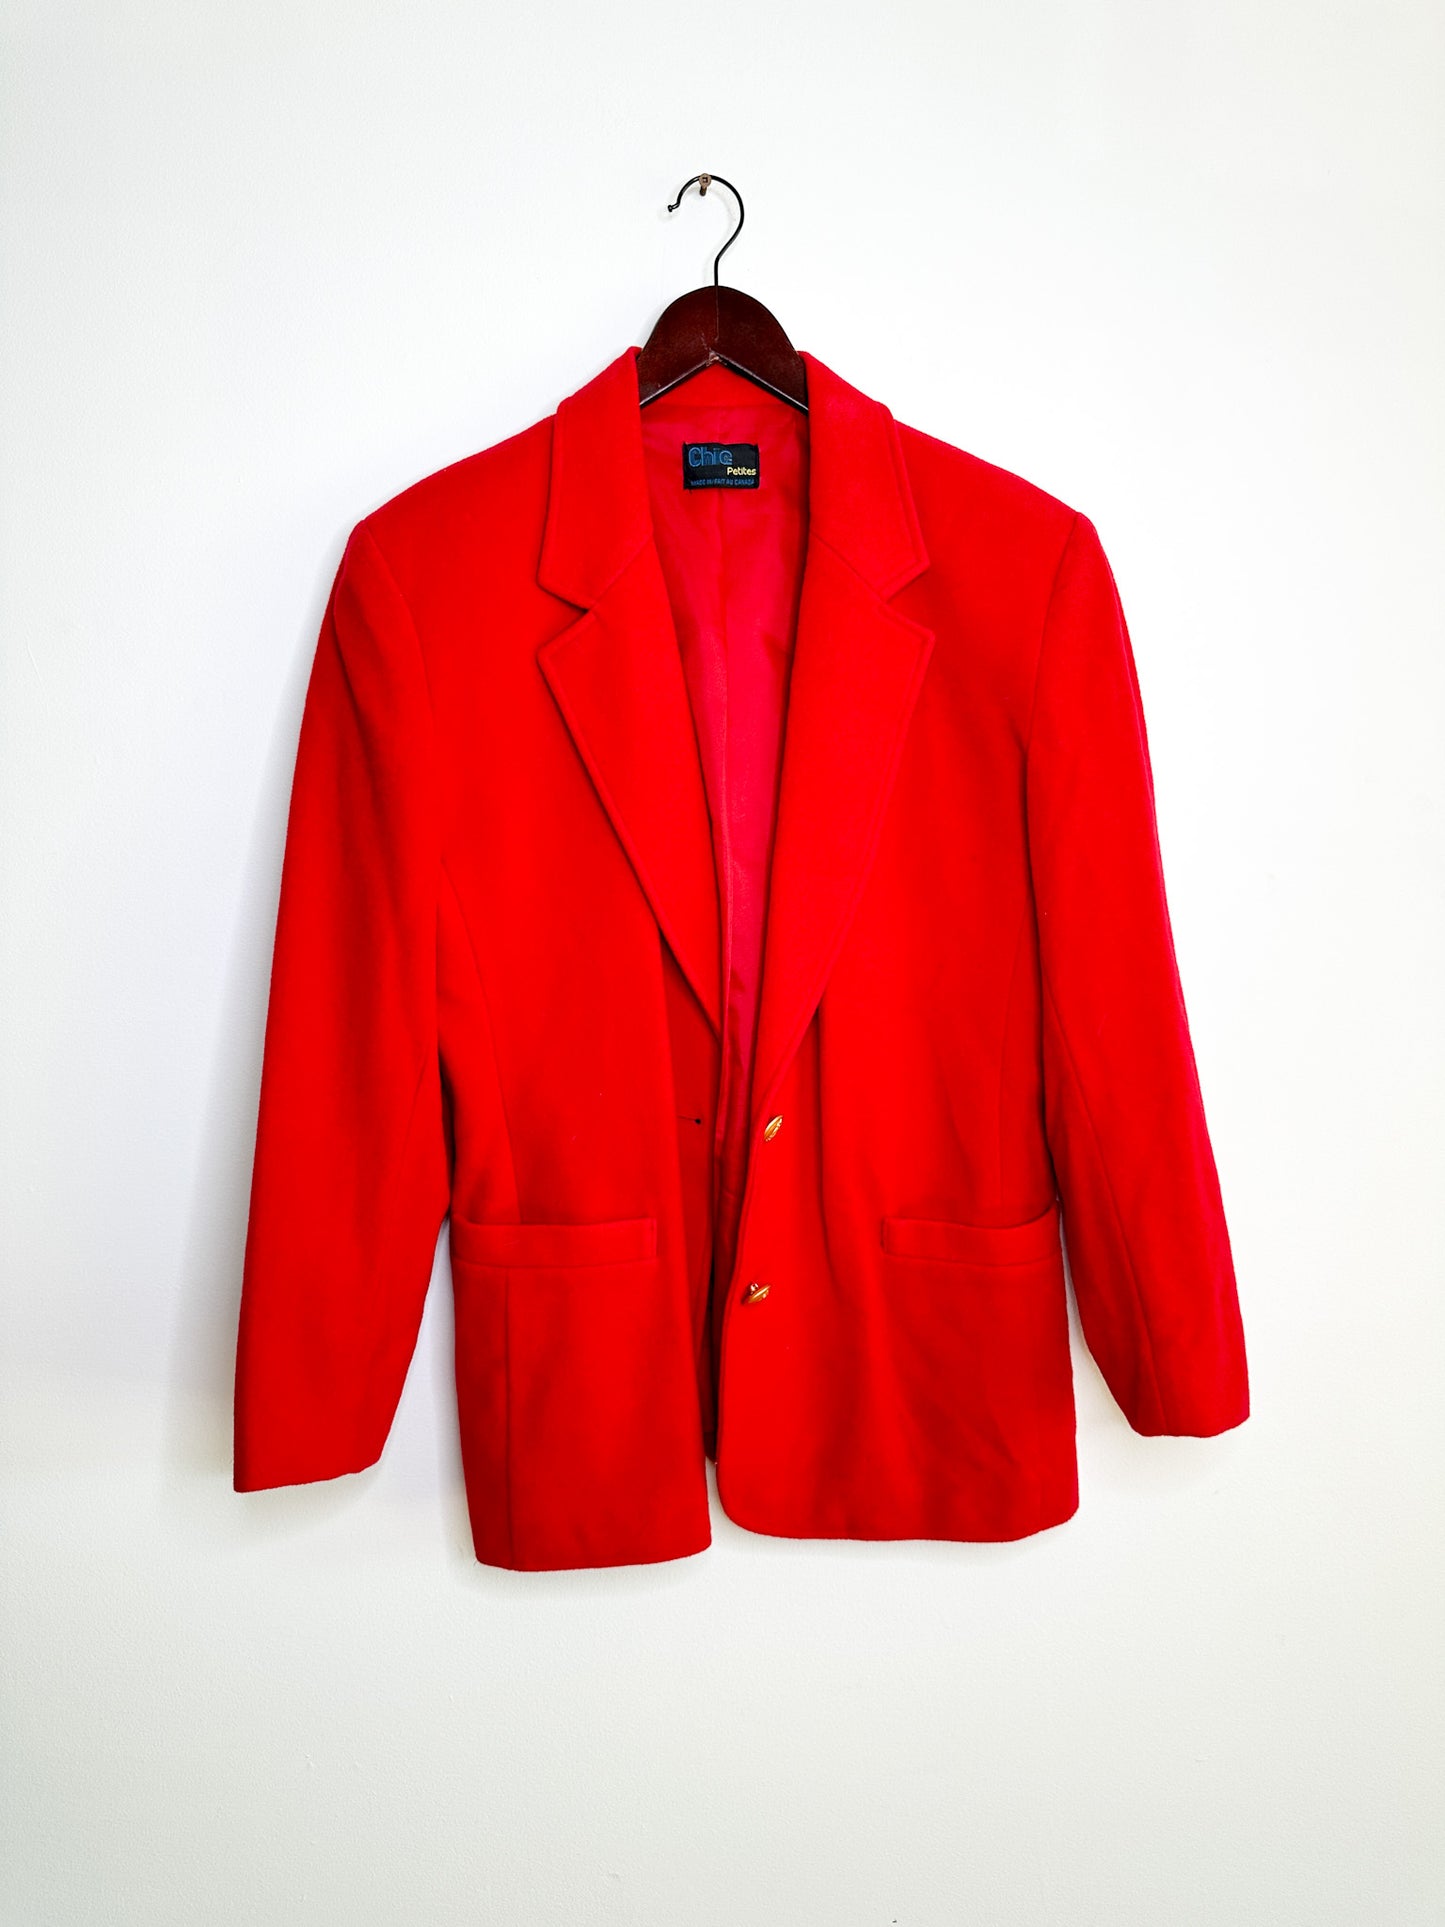 Evan-Picone Couture Red Linen Blend Blazer with Pockets| Red Fall/Winter Blazer | Size: 8 (Medium)